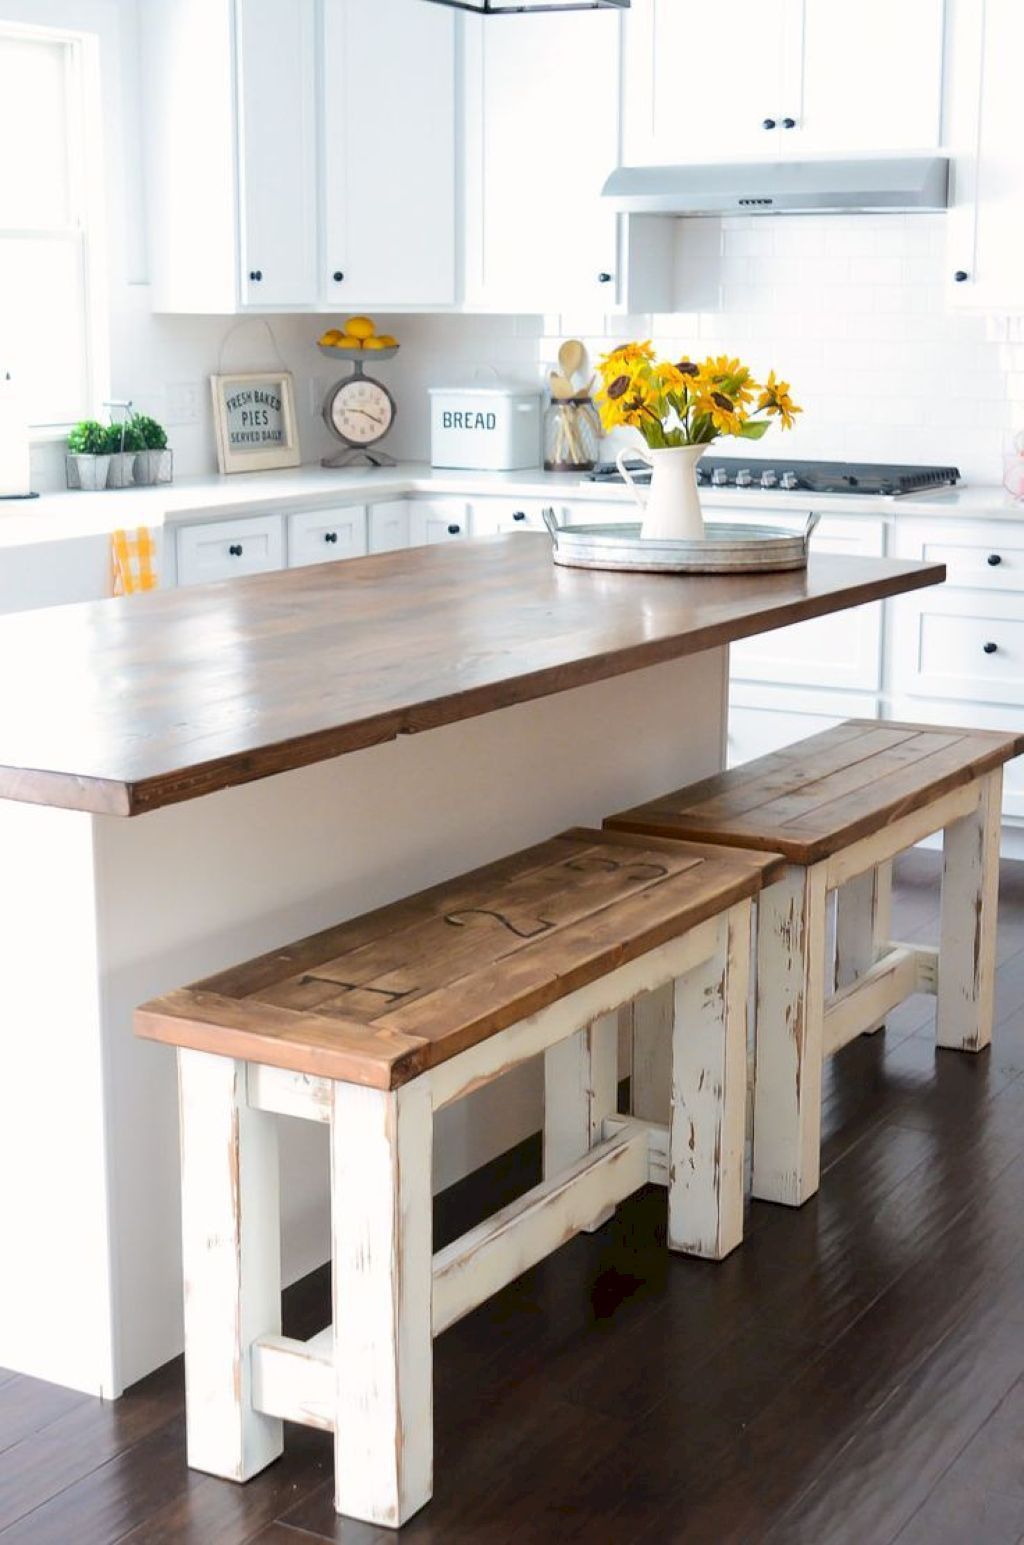 I am obsessed with these Fixer Upper DIY farmhouse kitchen decor ideas. They are so cool! I love the idea of taking something vintage from an antique or thrift store and repursing decor items and it transforming my kitchen. With inspiration from Chip & Joanna Gaines, it is so cheap and easy to get the DIY farmhouse style in my kitchen! This is a must try! #DIYhomedecor #farmhousedecor #farmhousekitchen #DIY #fixerupper #kitchendecor